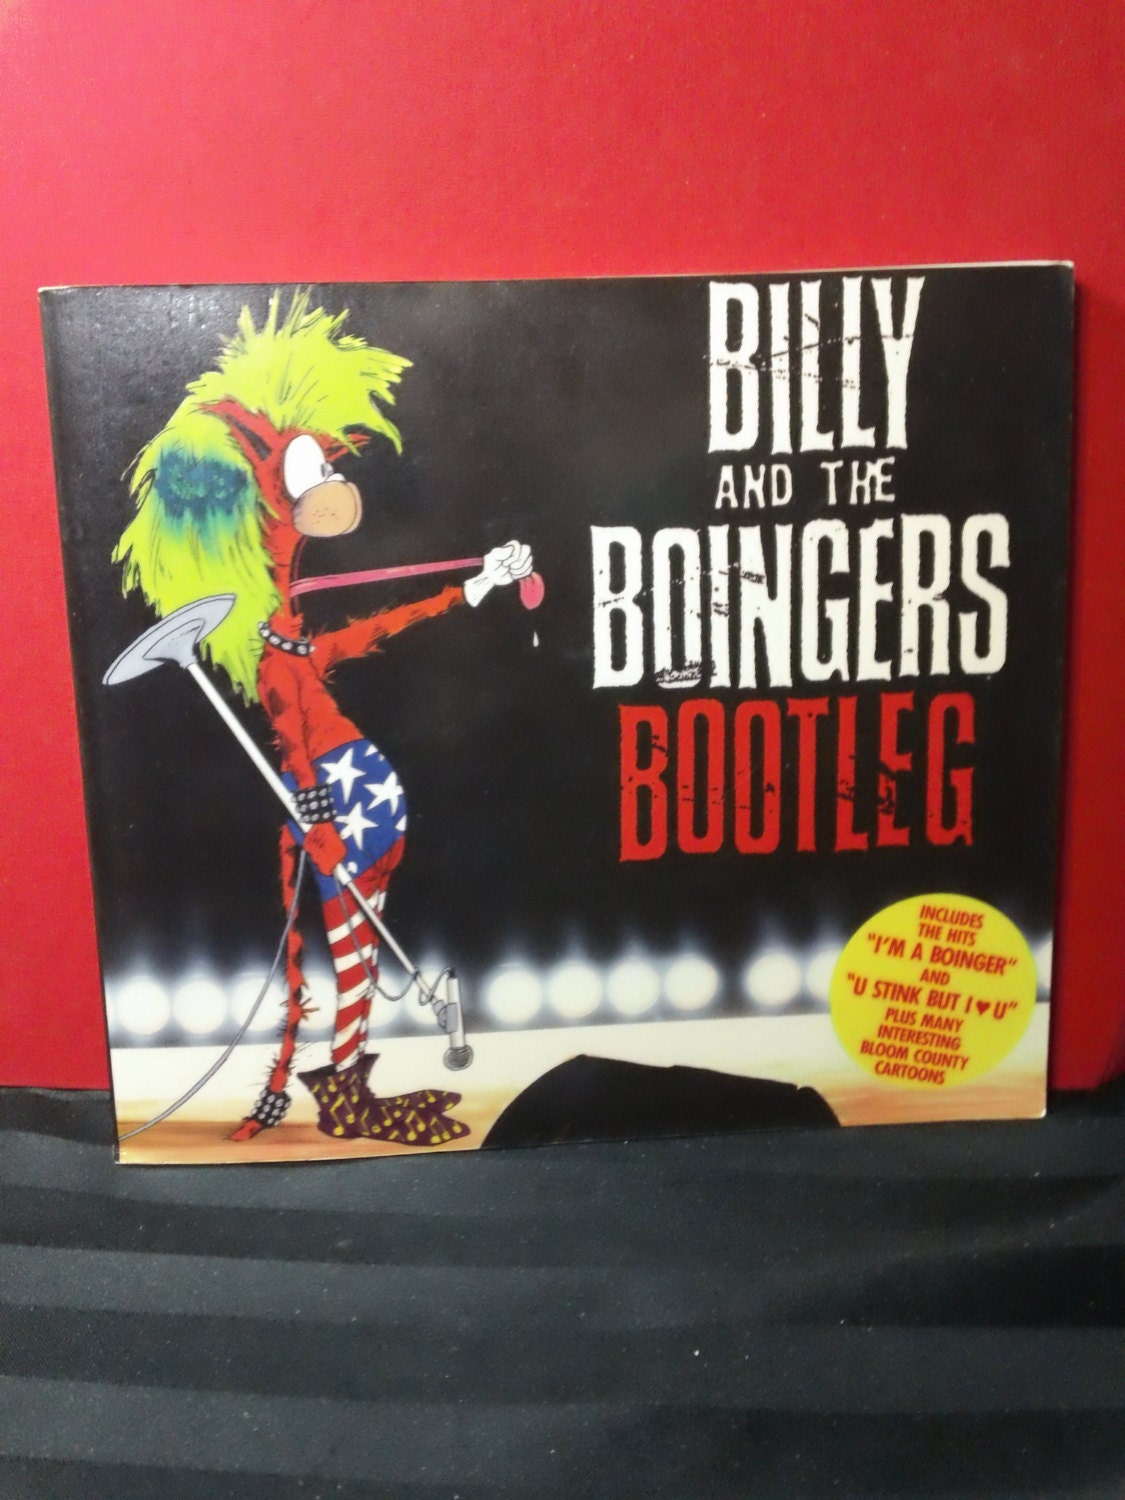 Billy and the Boingers Bootleg by Berkeley Breathed